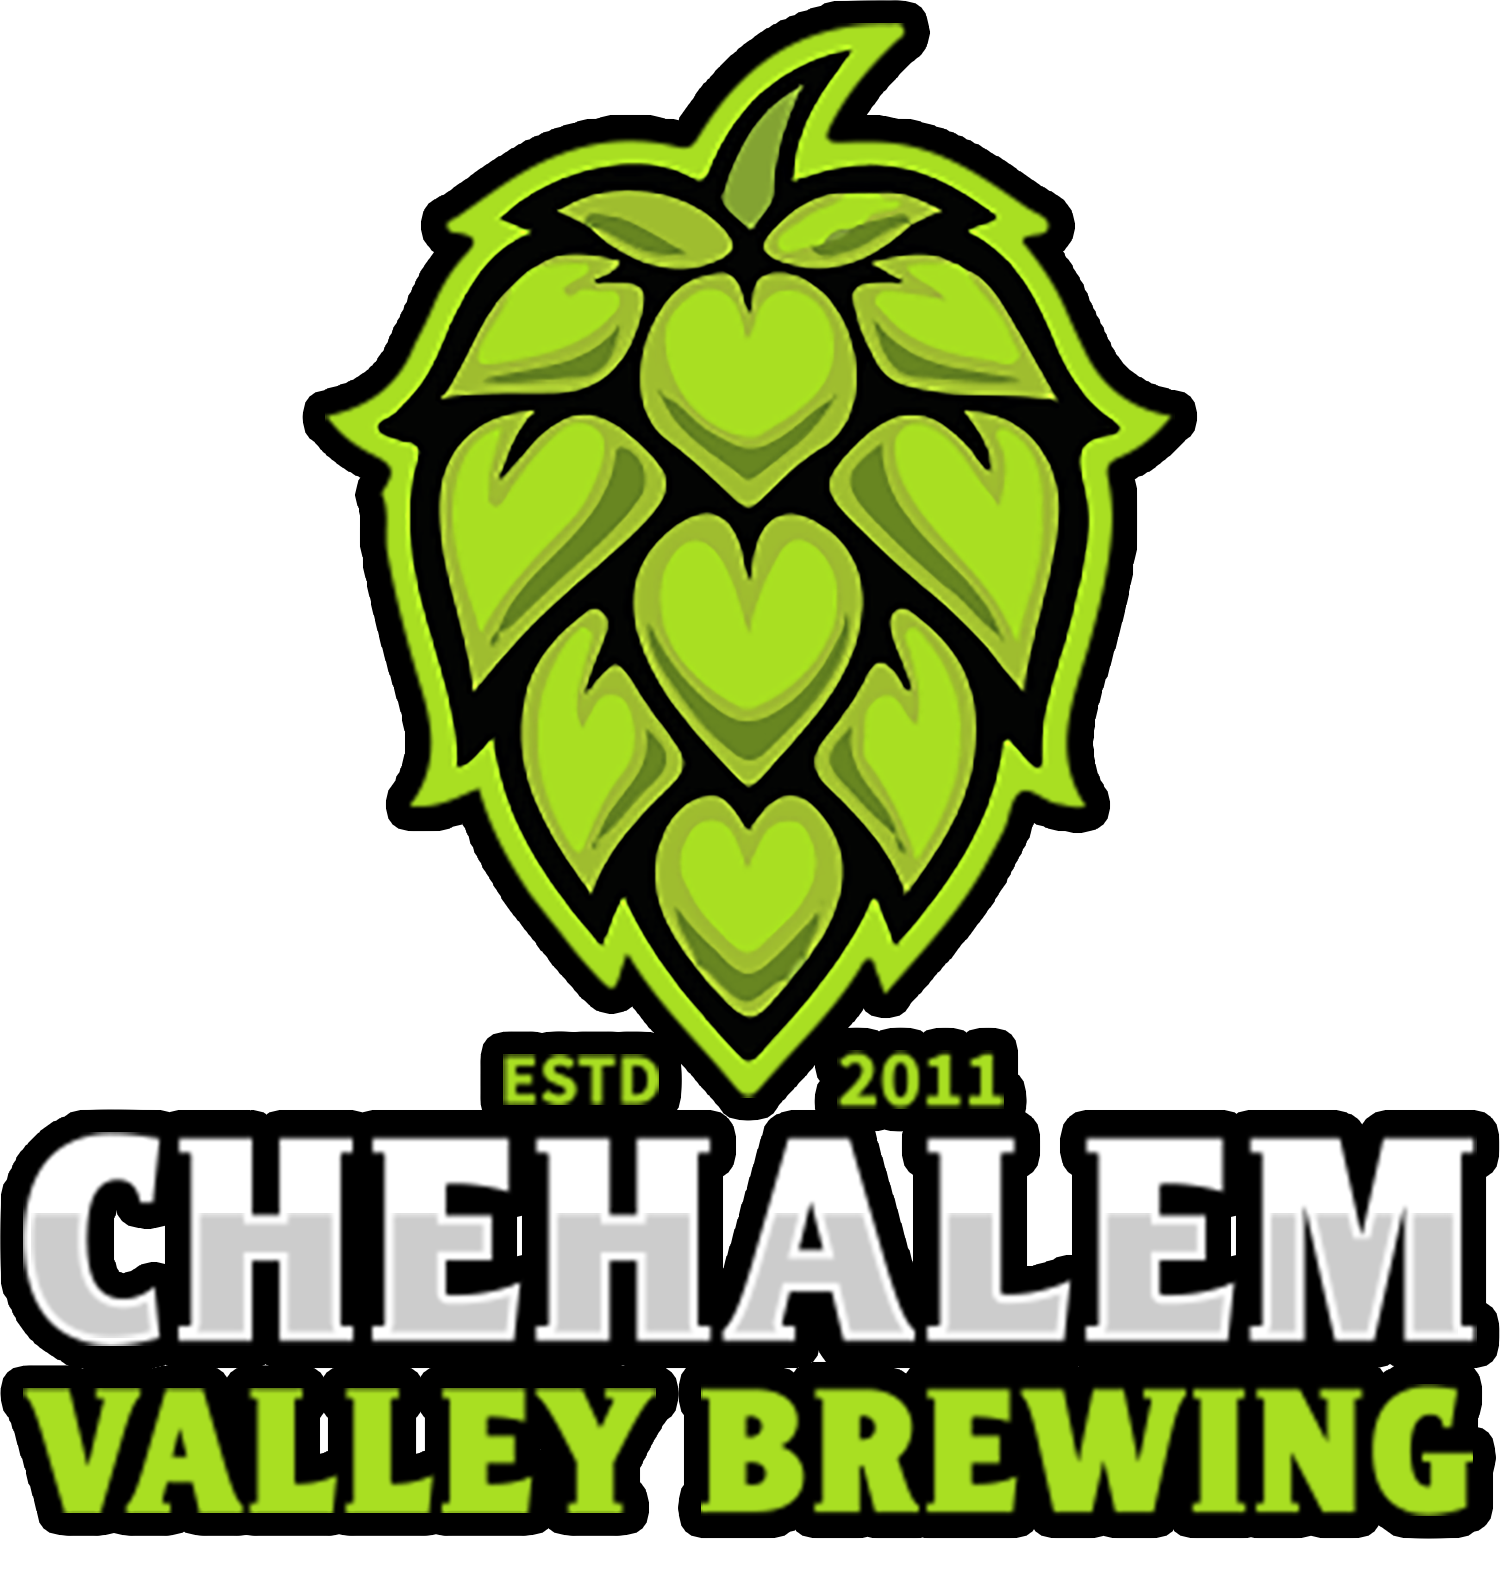 Chehalem Valley Brewery and Pub